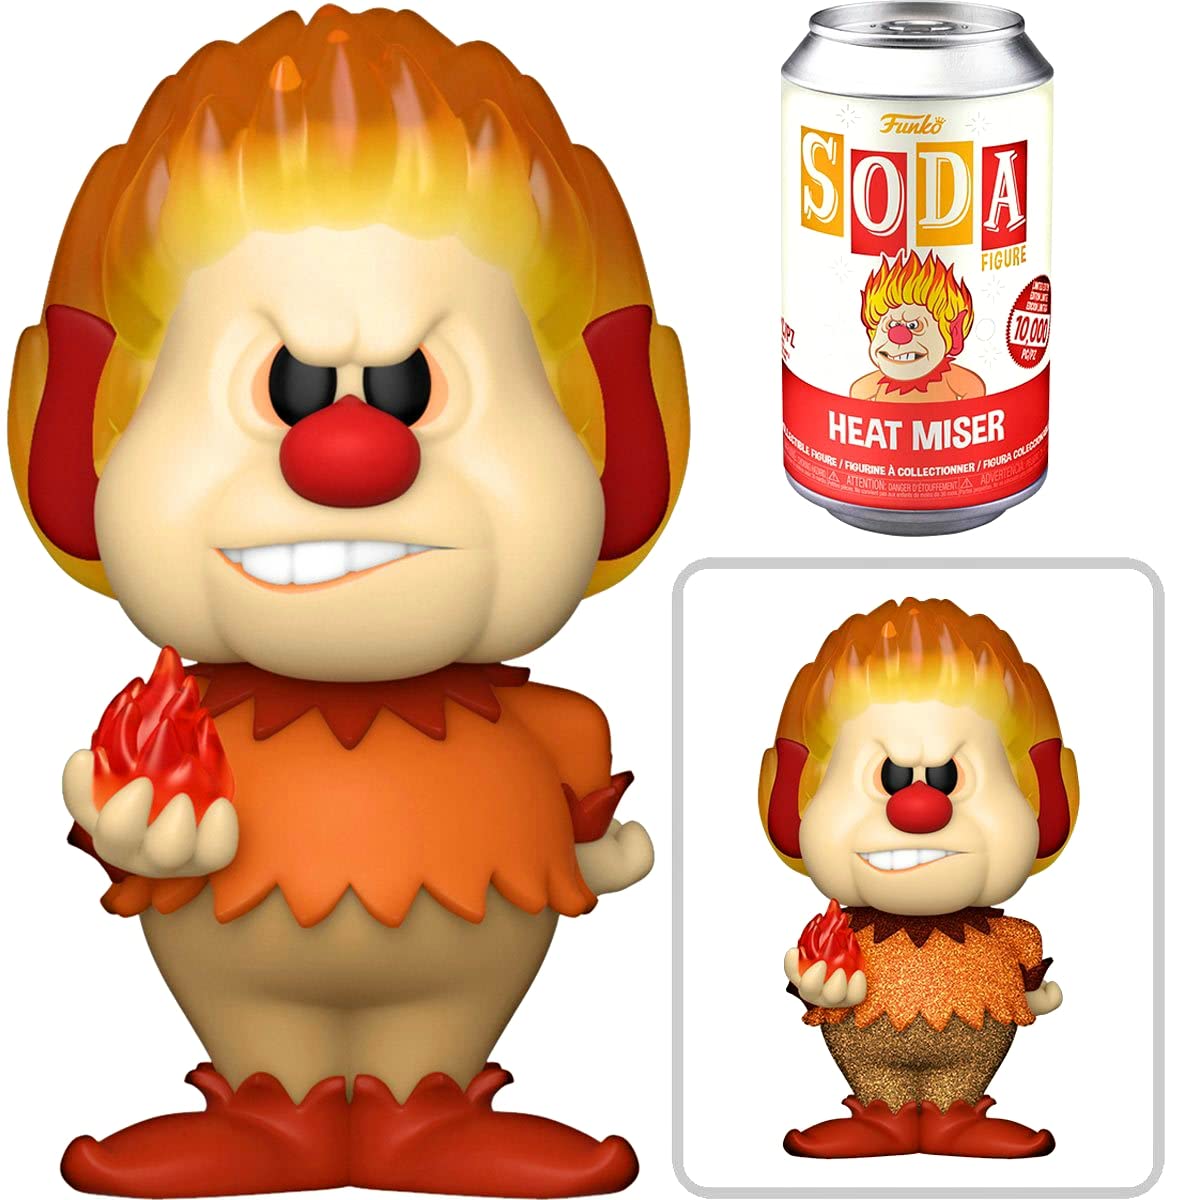 Funko Soda The Year Without a Santa Claus Heat Miser